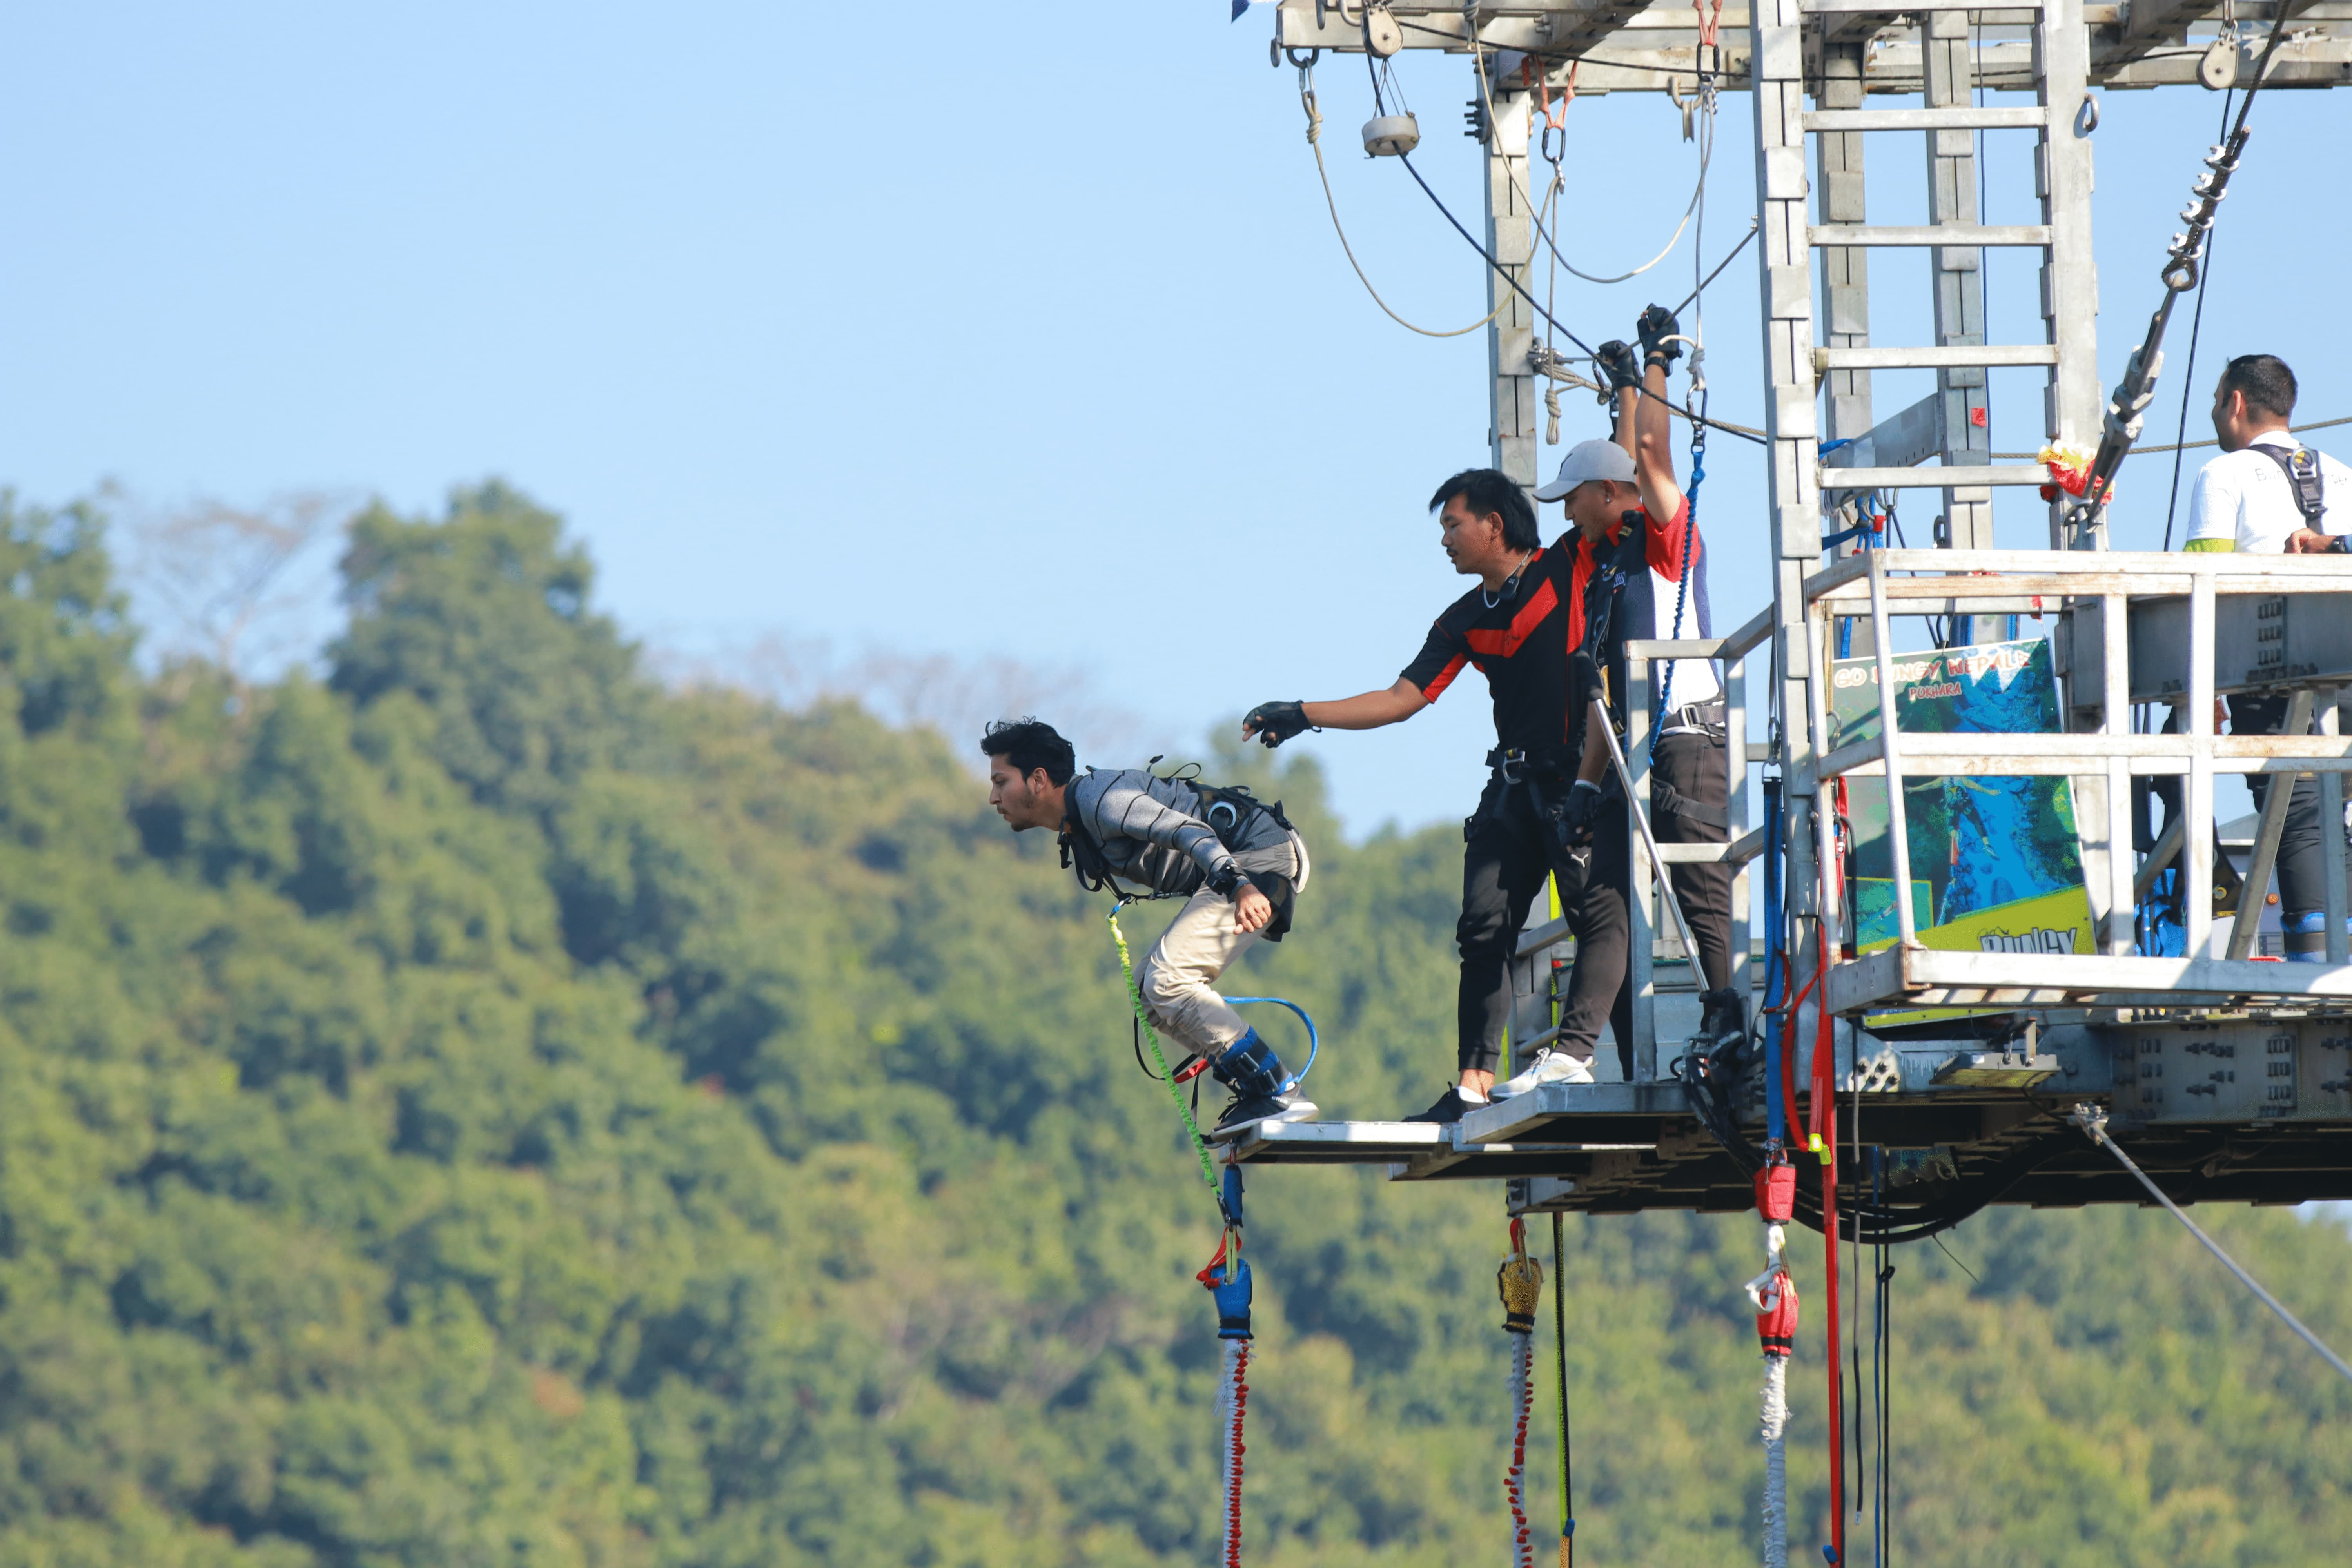 Guest from North Nepal Trek, going for a dive in Bungee in Pokhara.